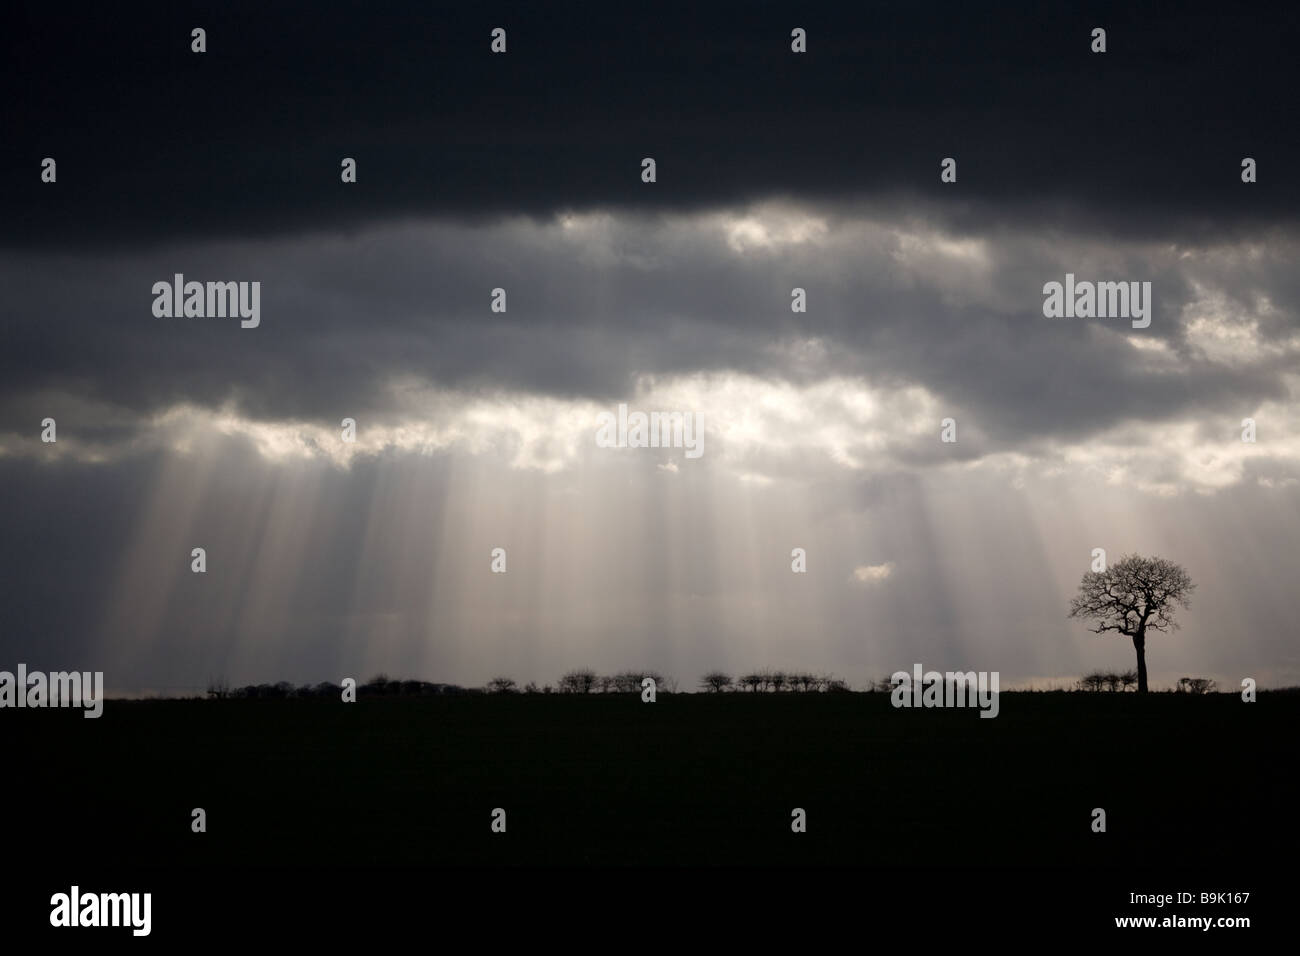 Storm Clouds Gathering Over a Tree Stock Photo